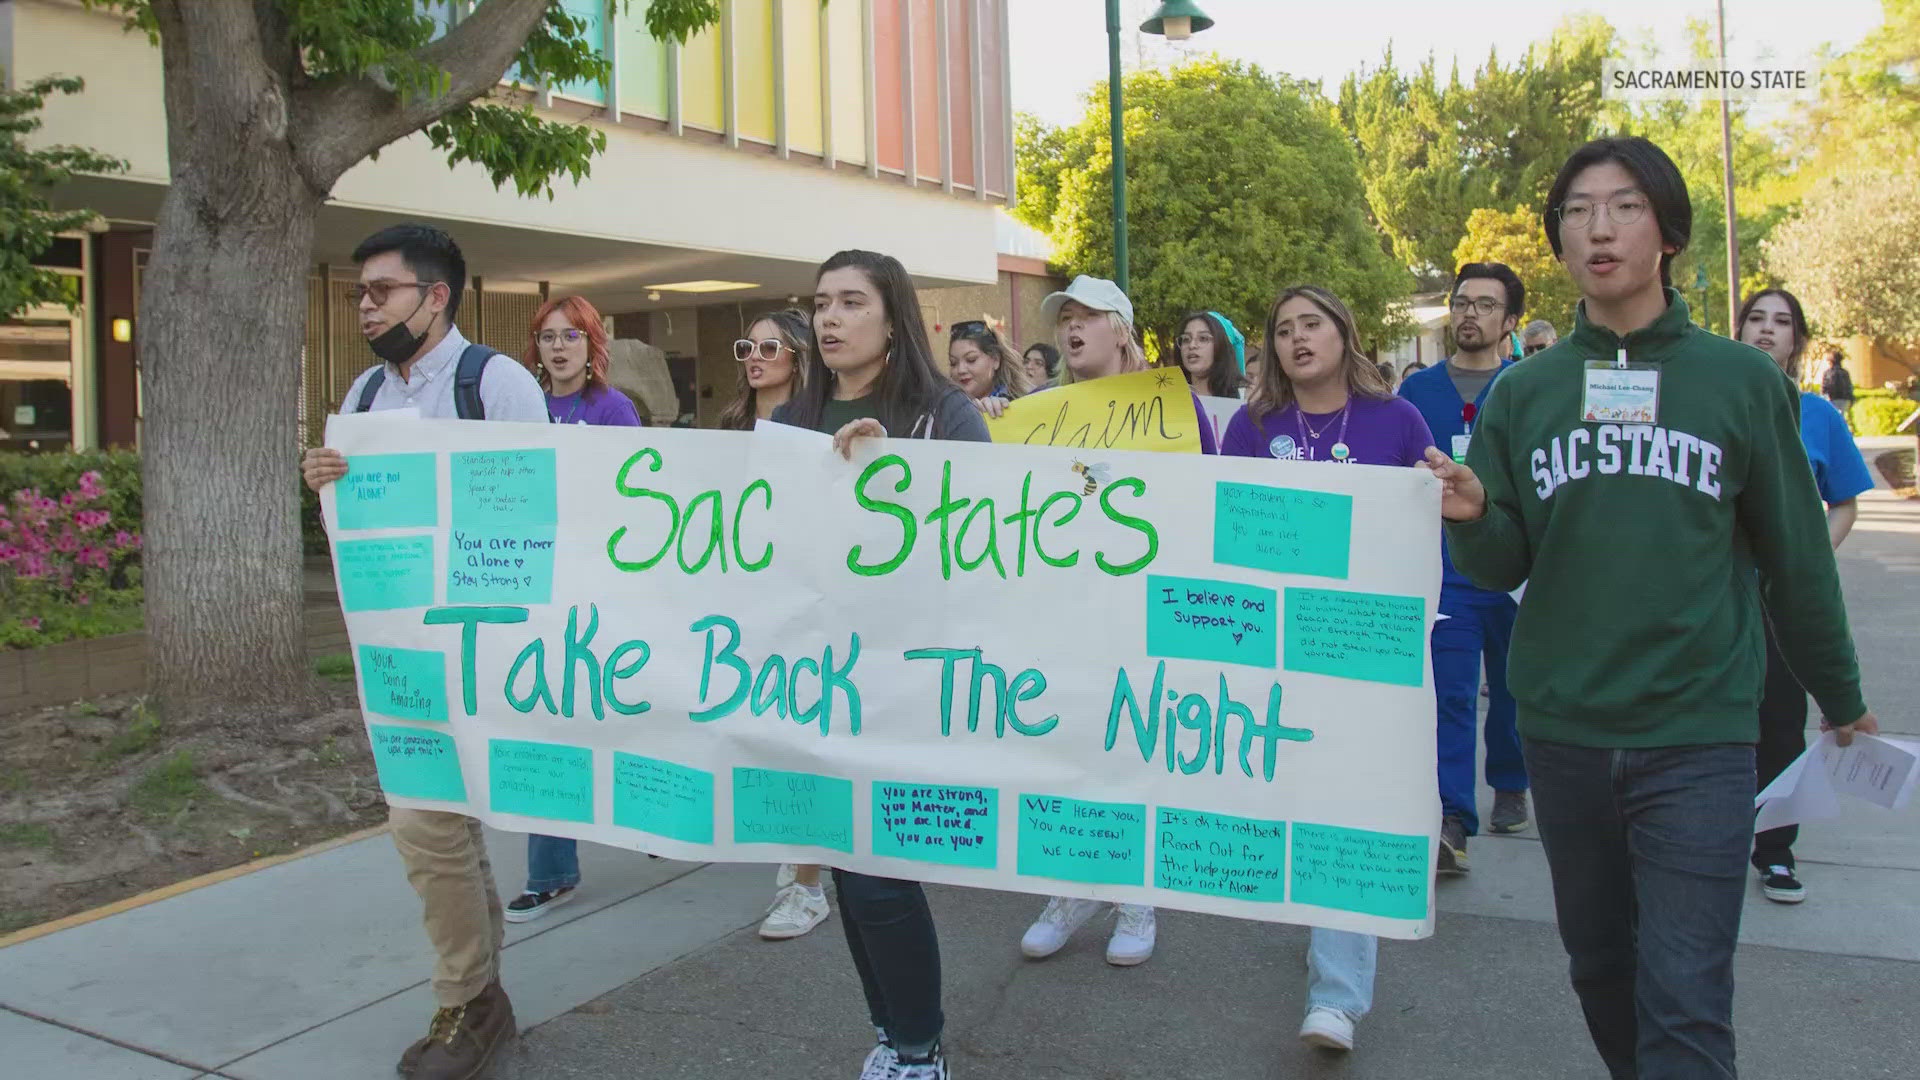 Sacramento State says it supports survivors and ending sexual violence through several events to raise awareness.